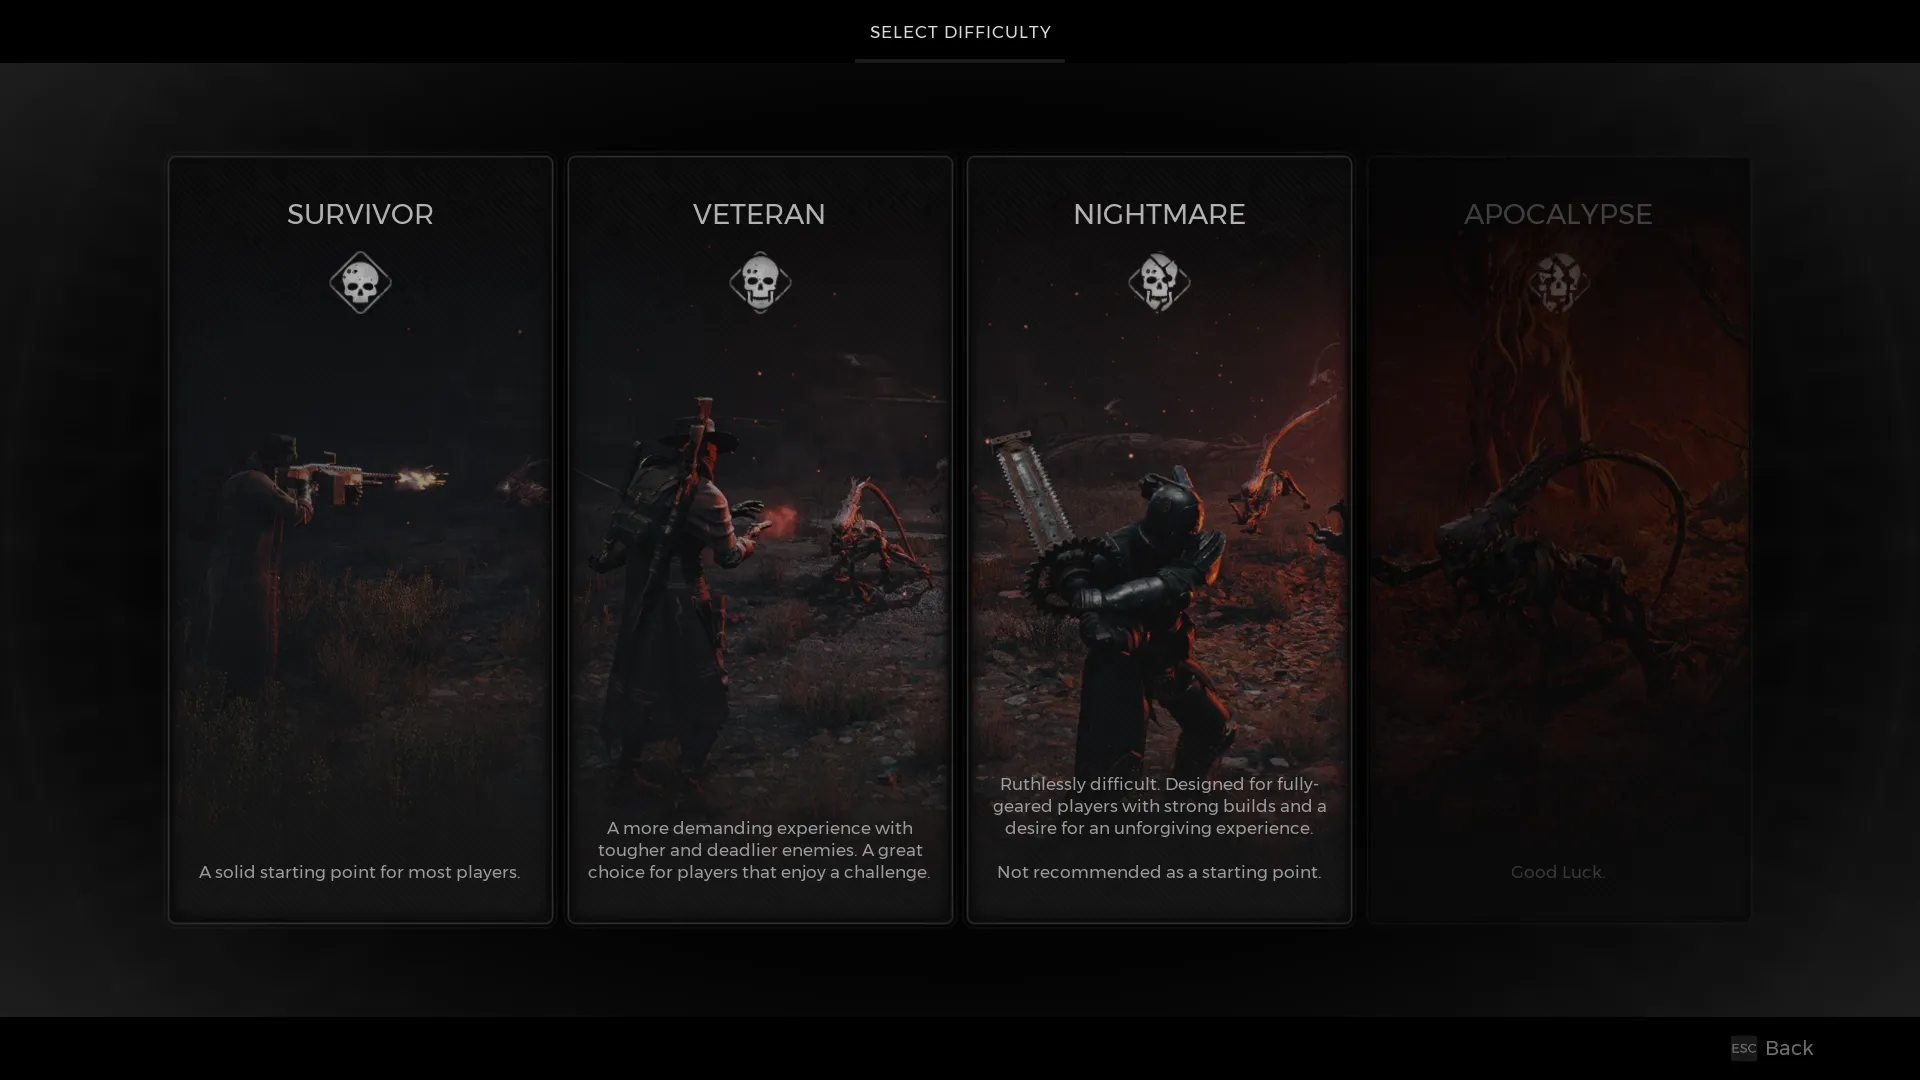 The four available difficulty options in Remnant 2